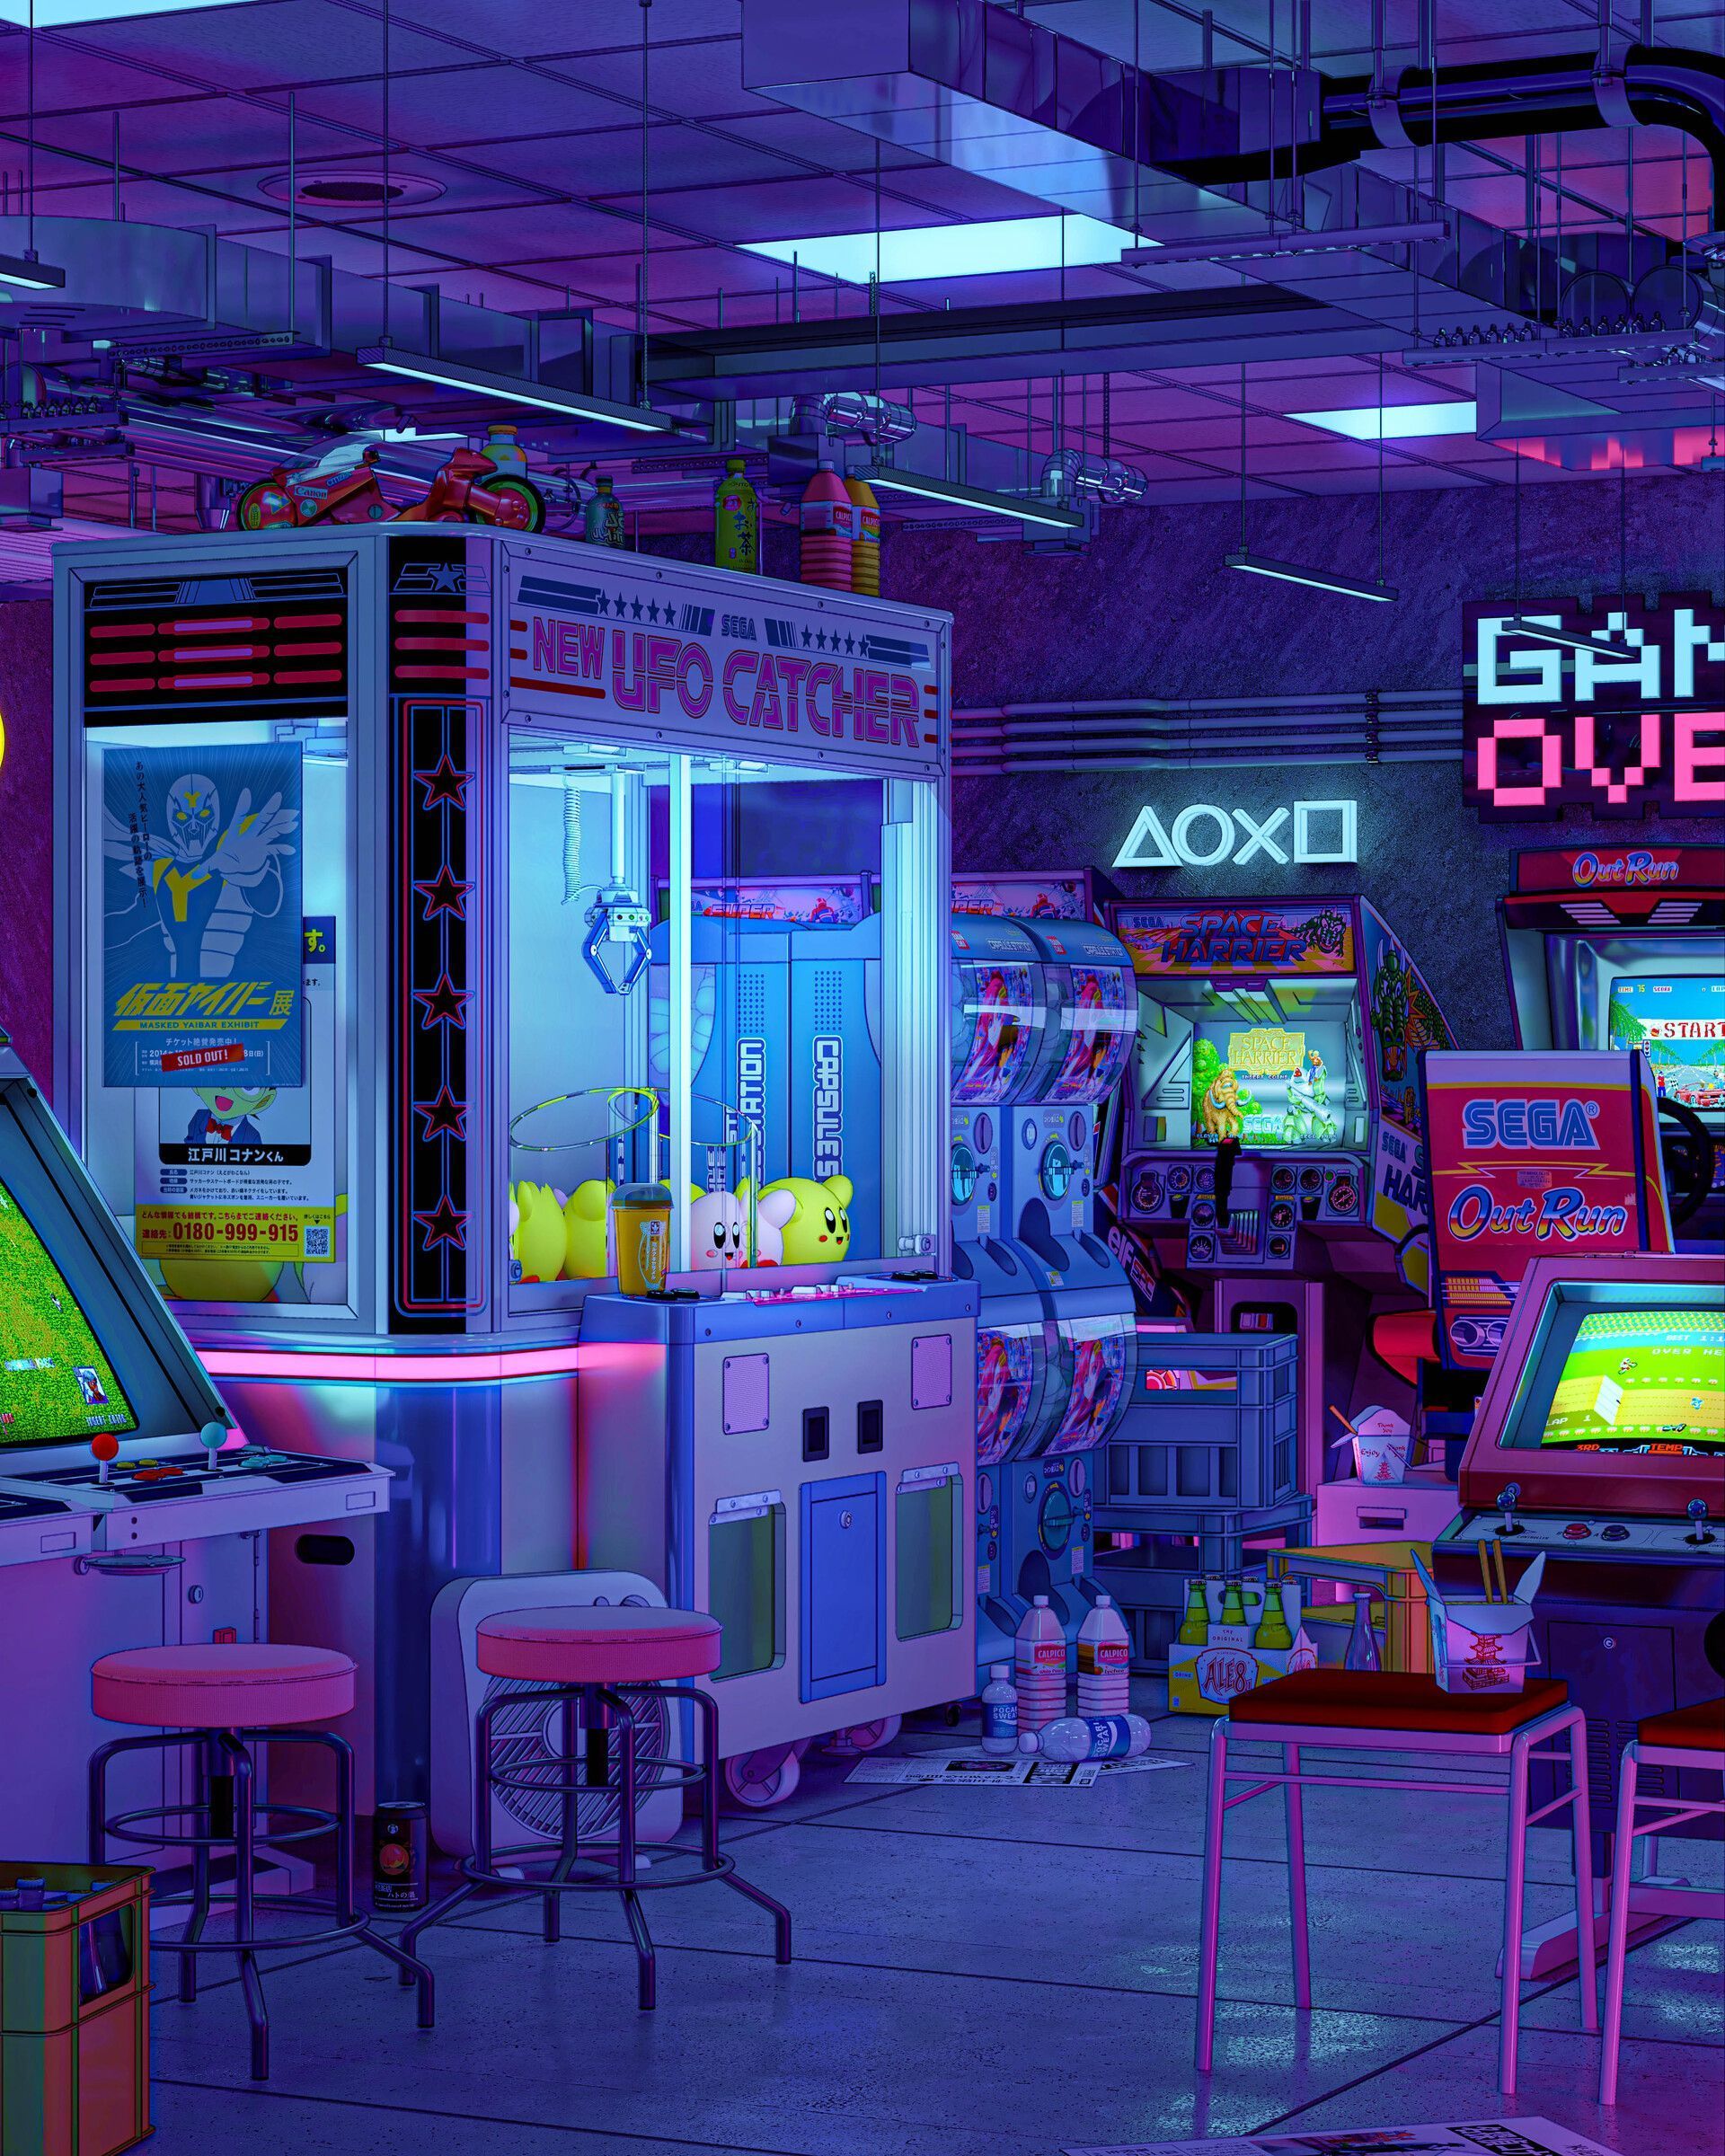 A room filled with arcade games and a claw machine - Arcade